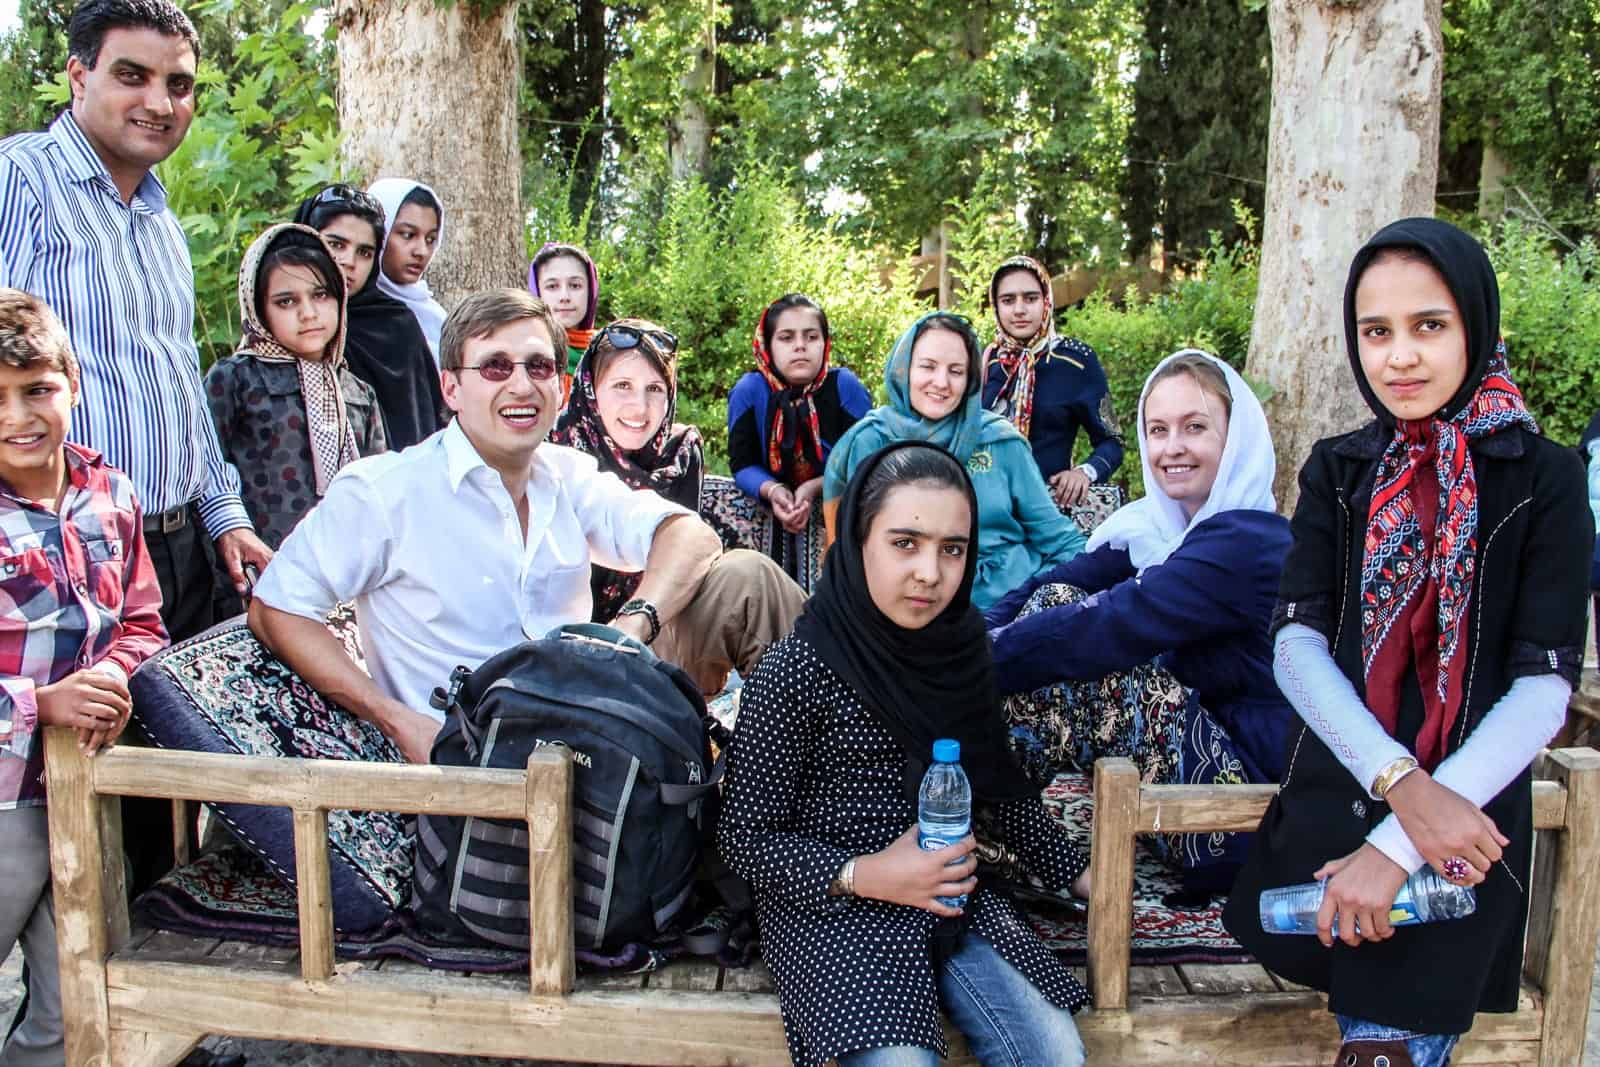 Travelling met locals in Iran showing it is safe to travel there